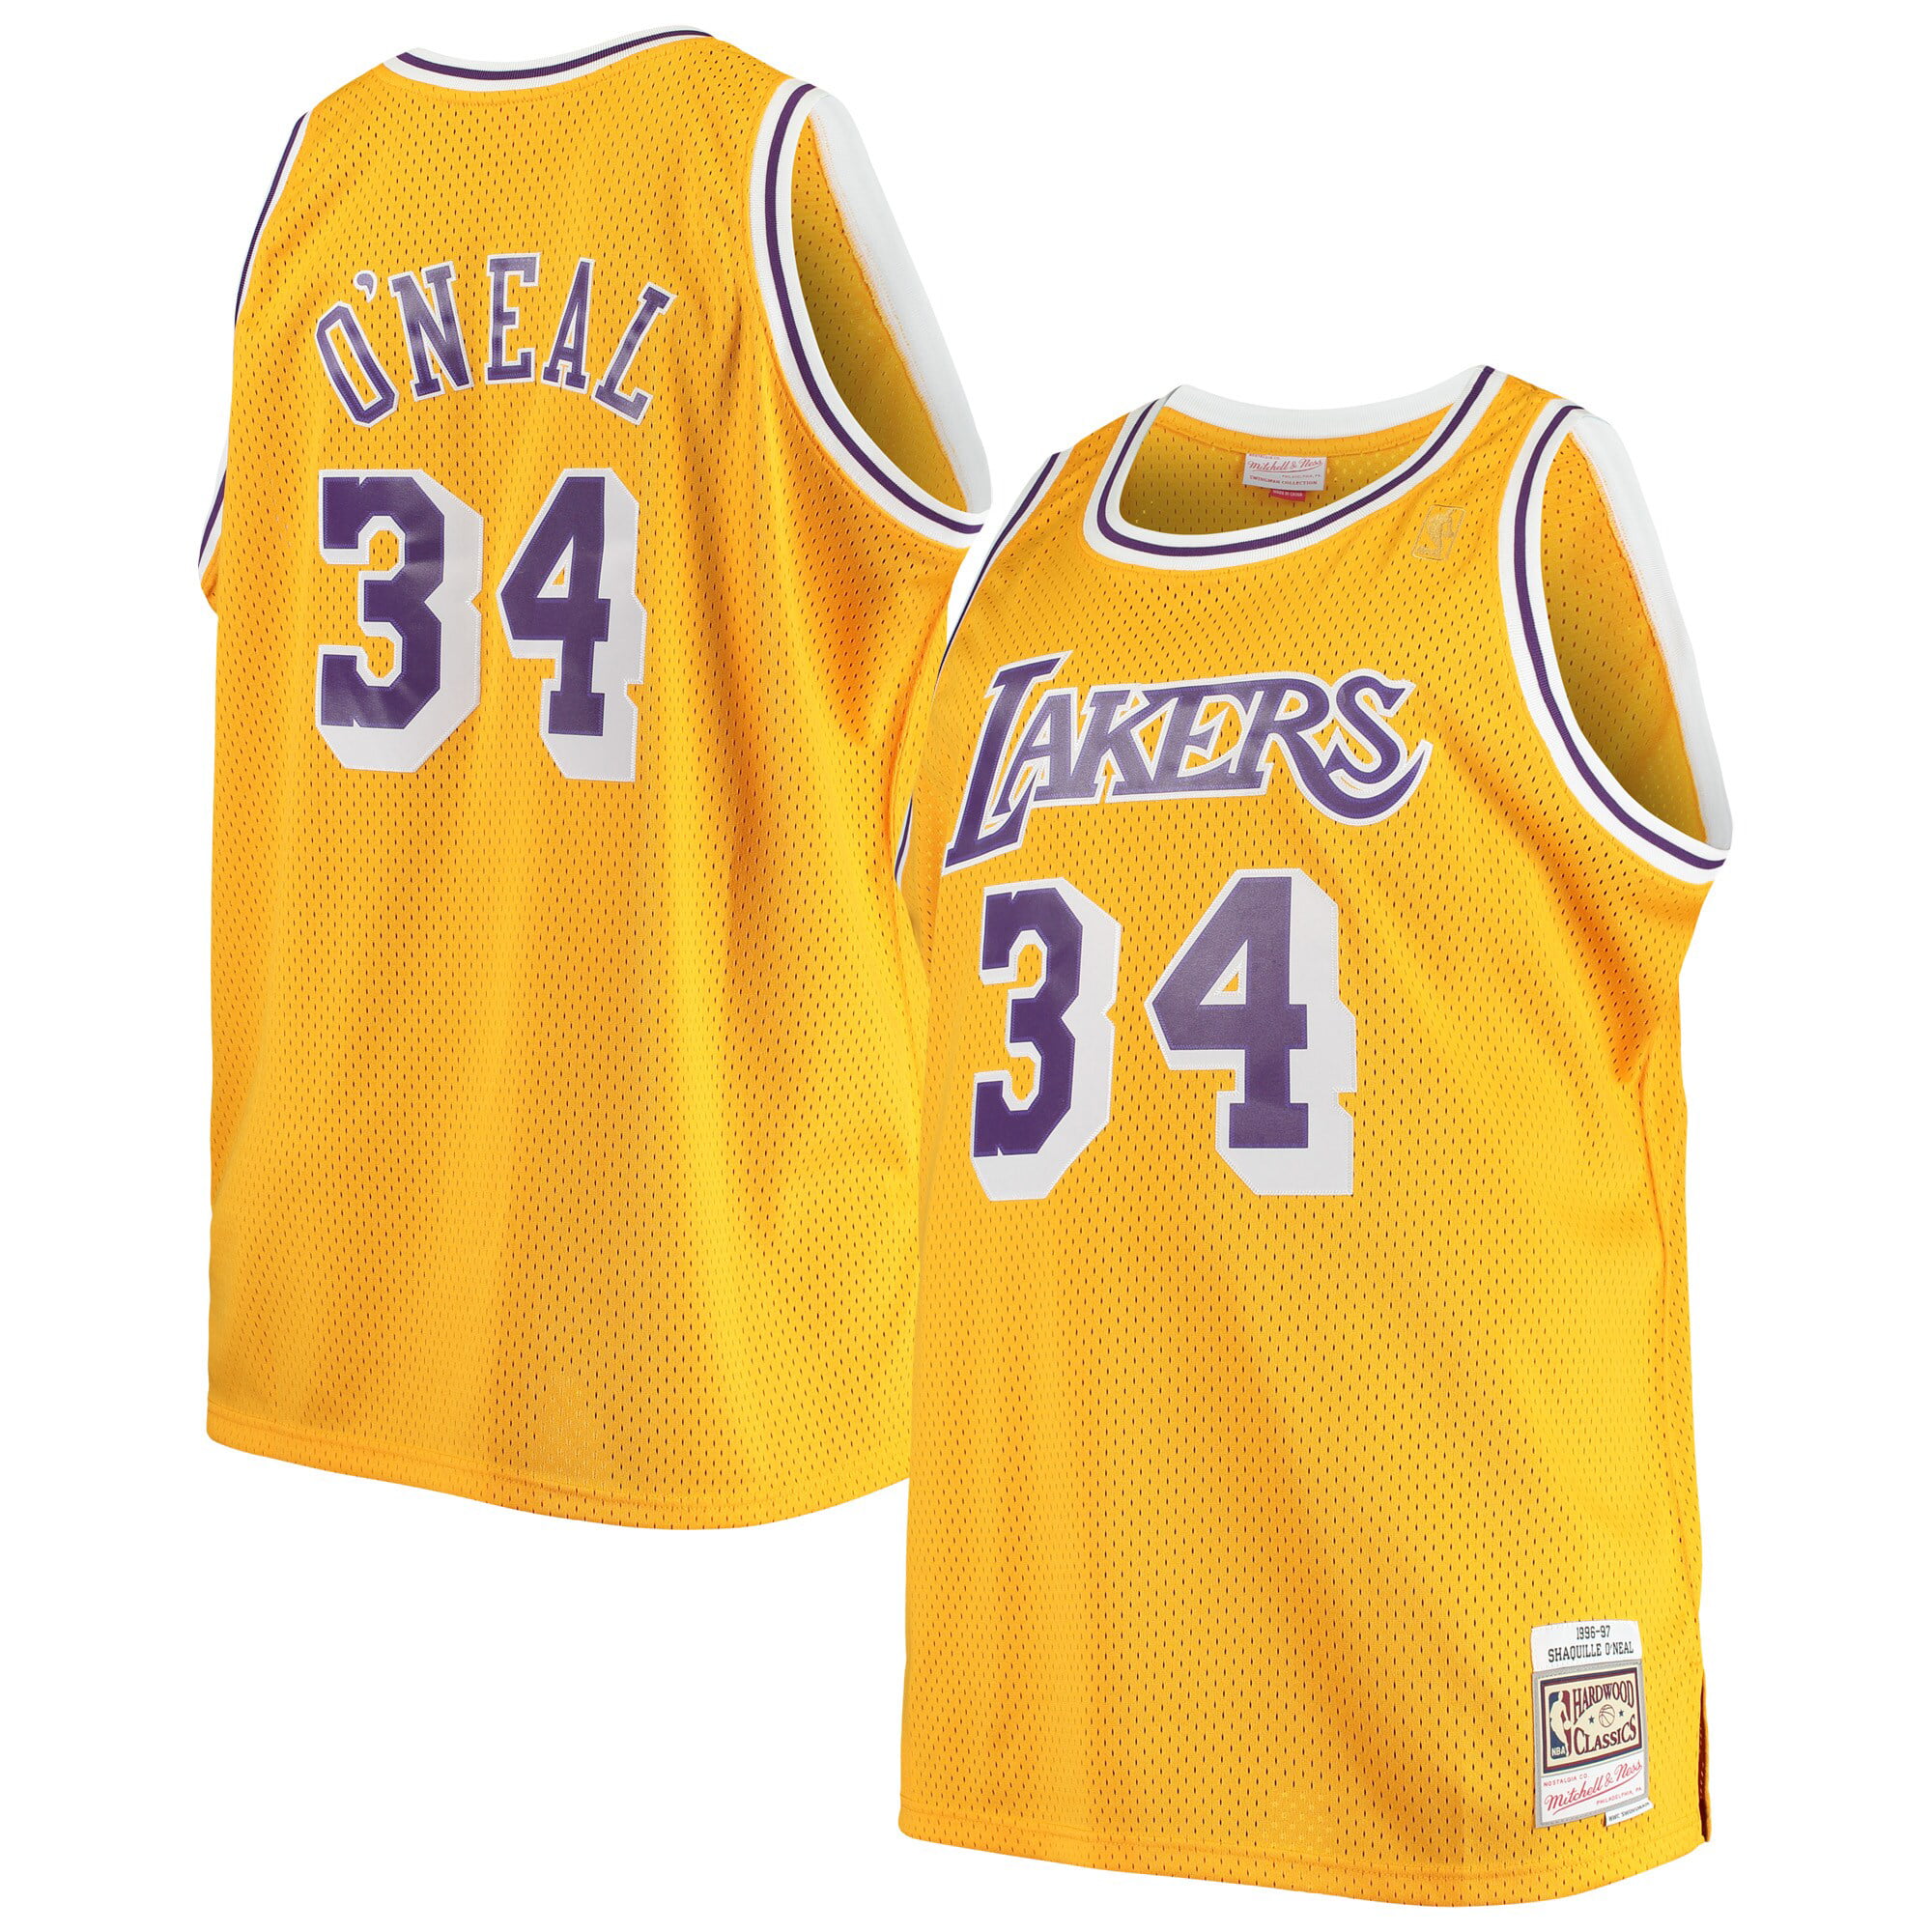 lebron james lakers jersey big and tall